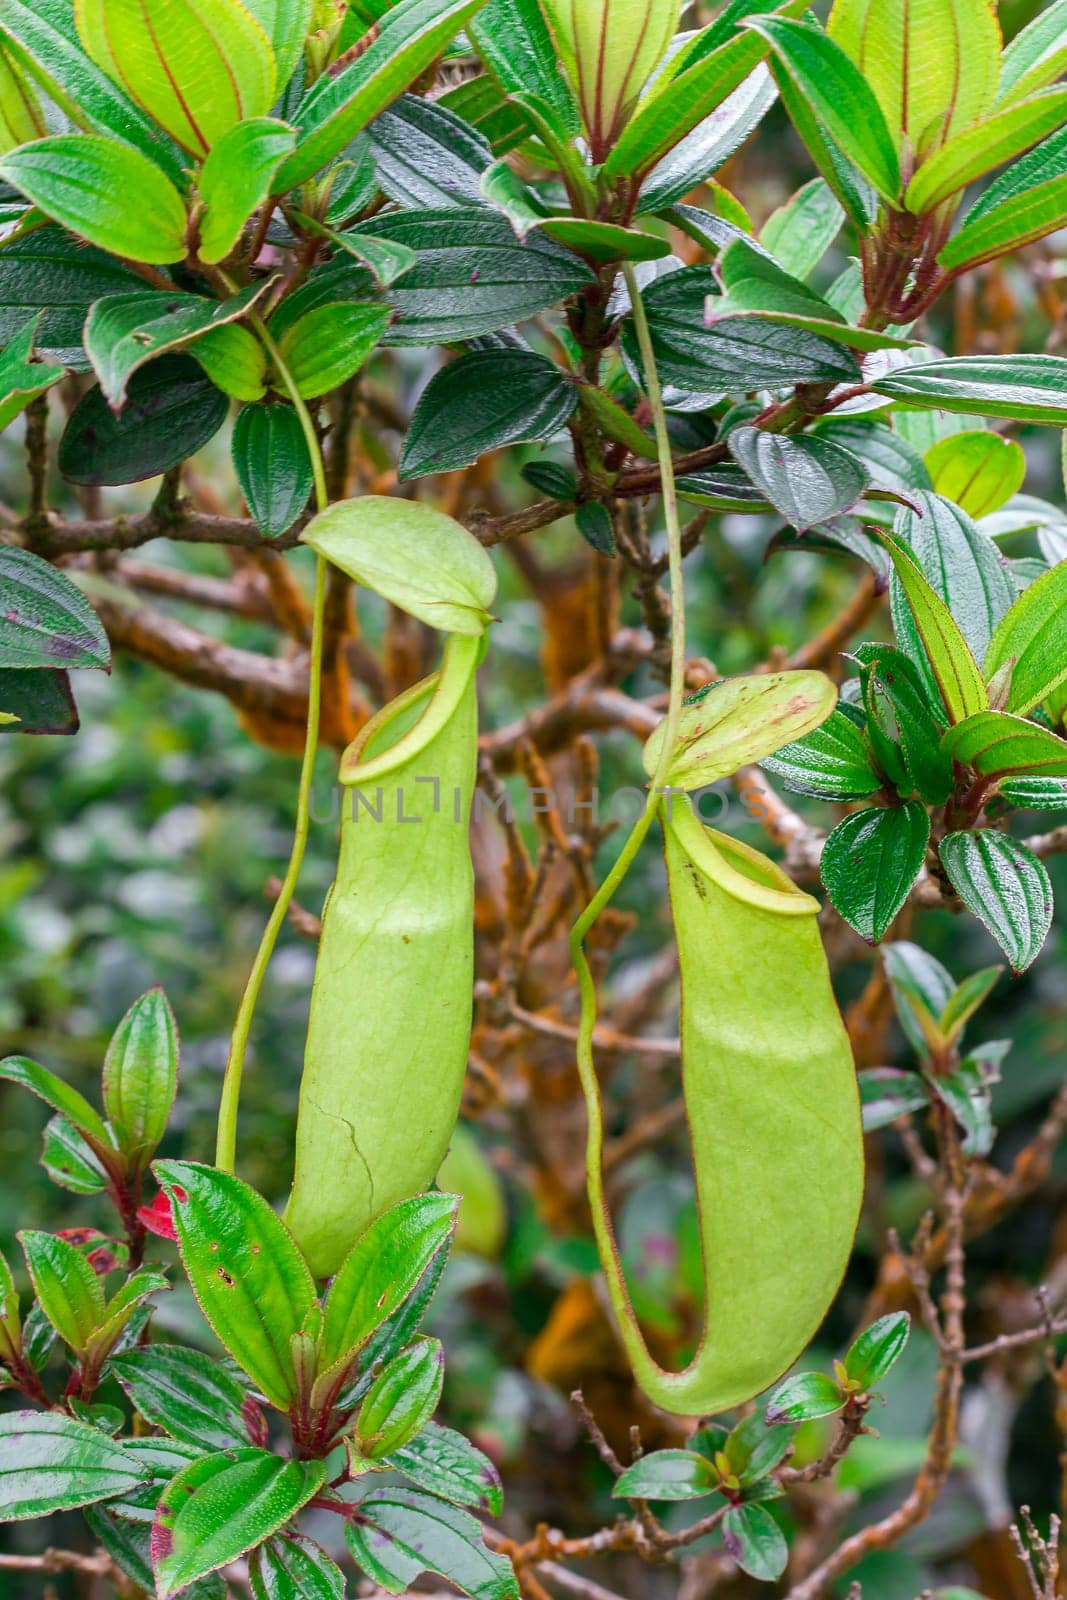 Nepenthes in the natural forest Is a type of animal eating plant